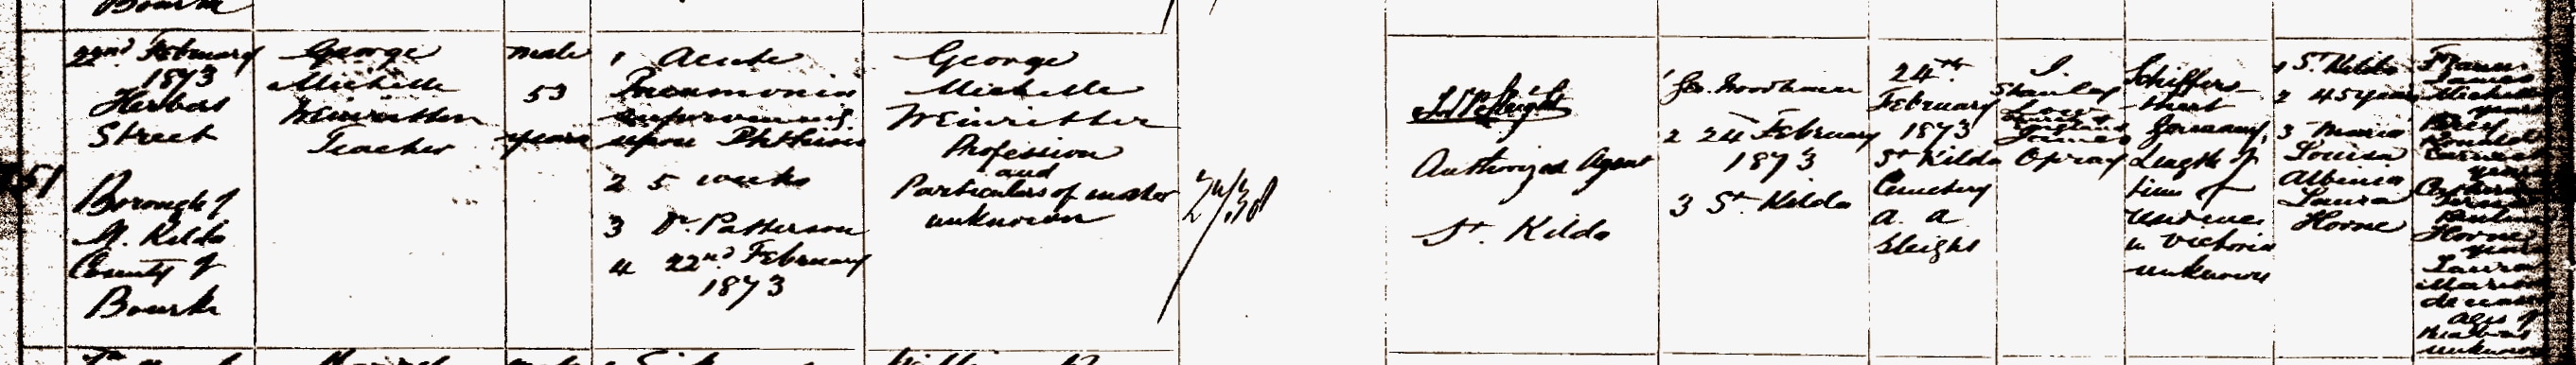 Death record, George Michelle Weinritter, 22 February 1873; Registry of Births, Deaths and Marriages Victoria